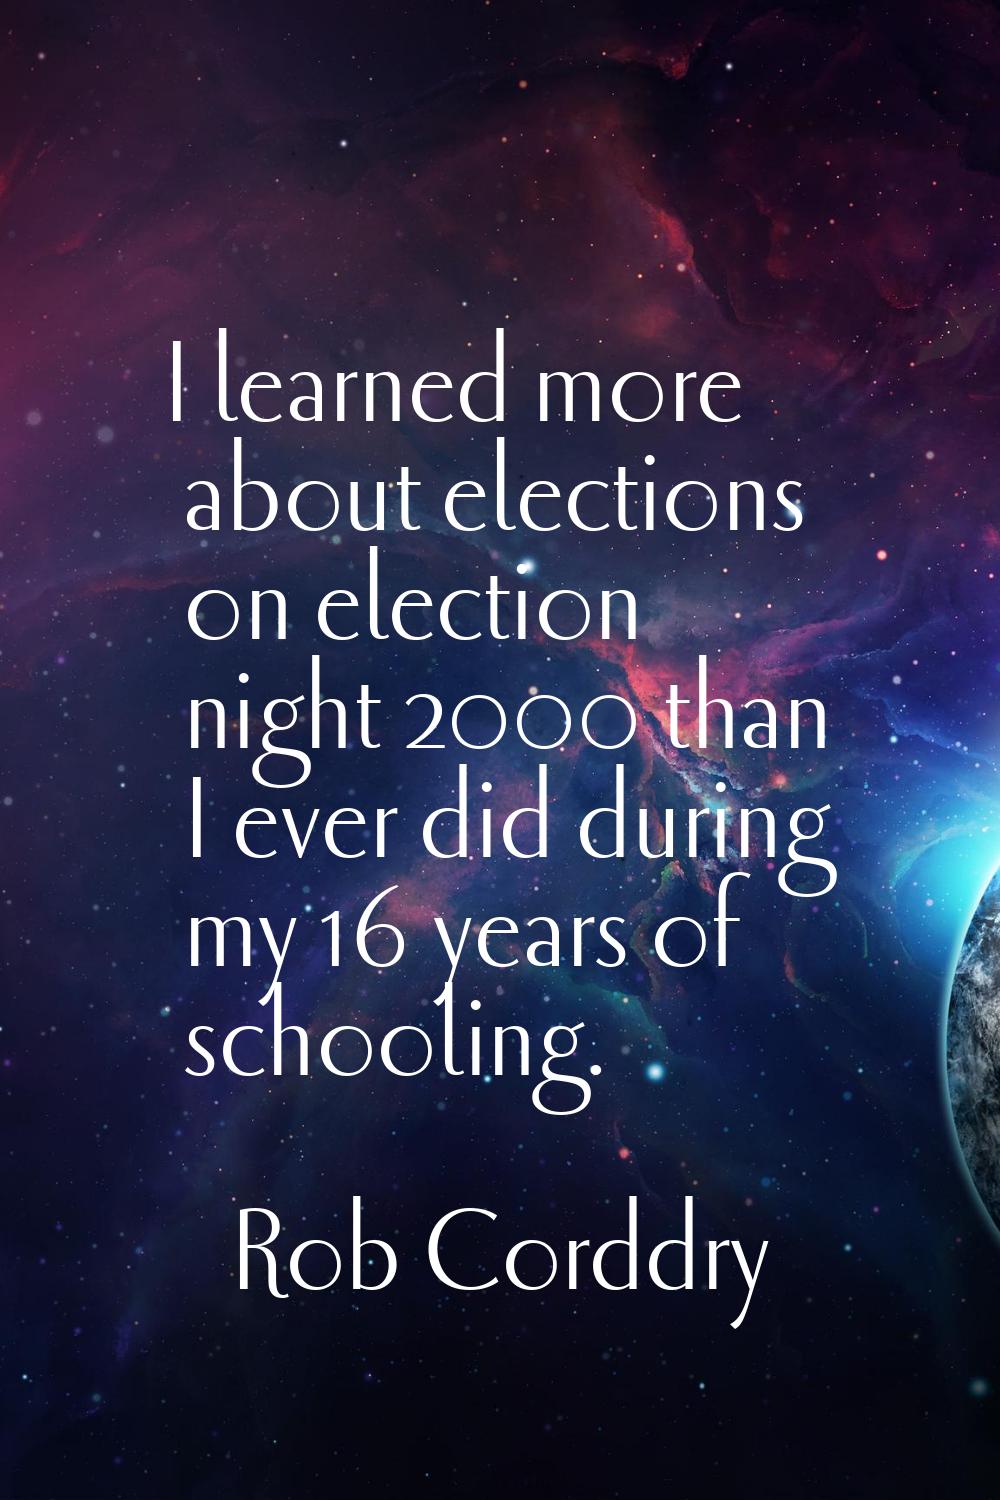 I learned more about elections on election night 2000 than I ever did during my 16 years of schooli